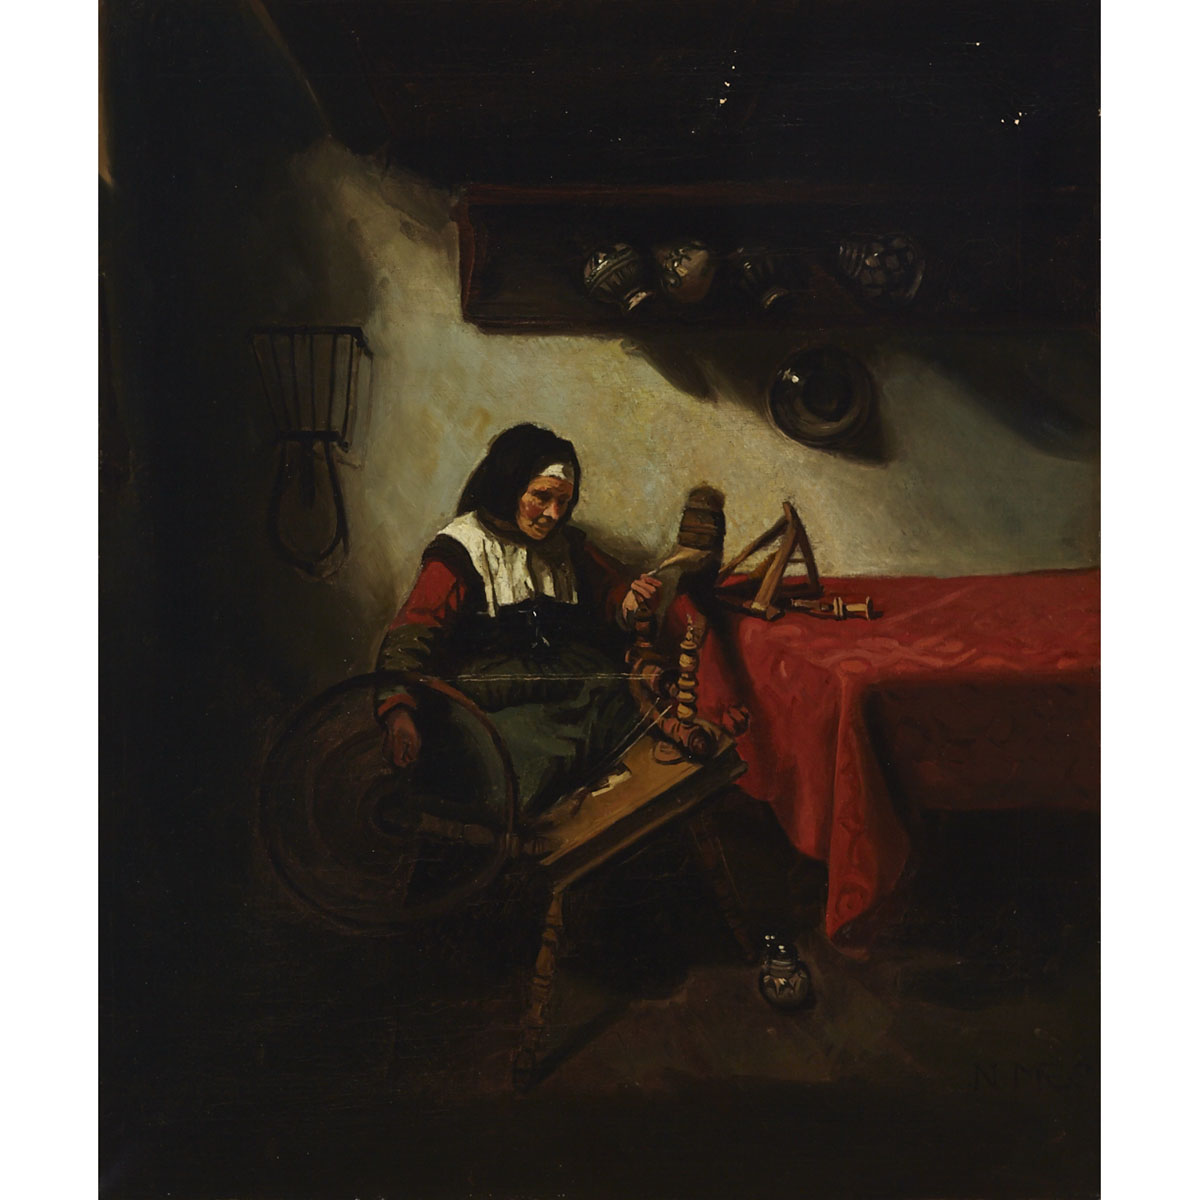 After Nicolaes Maes (1634-1693)